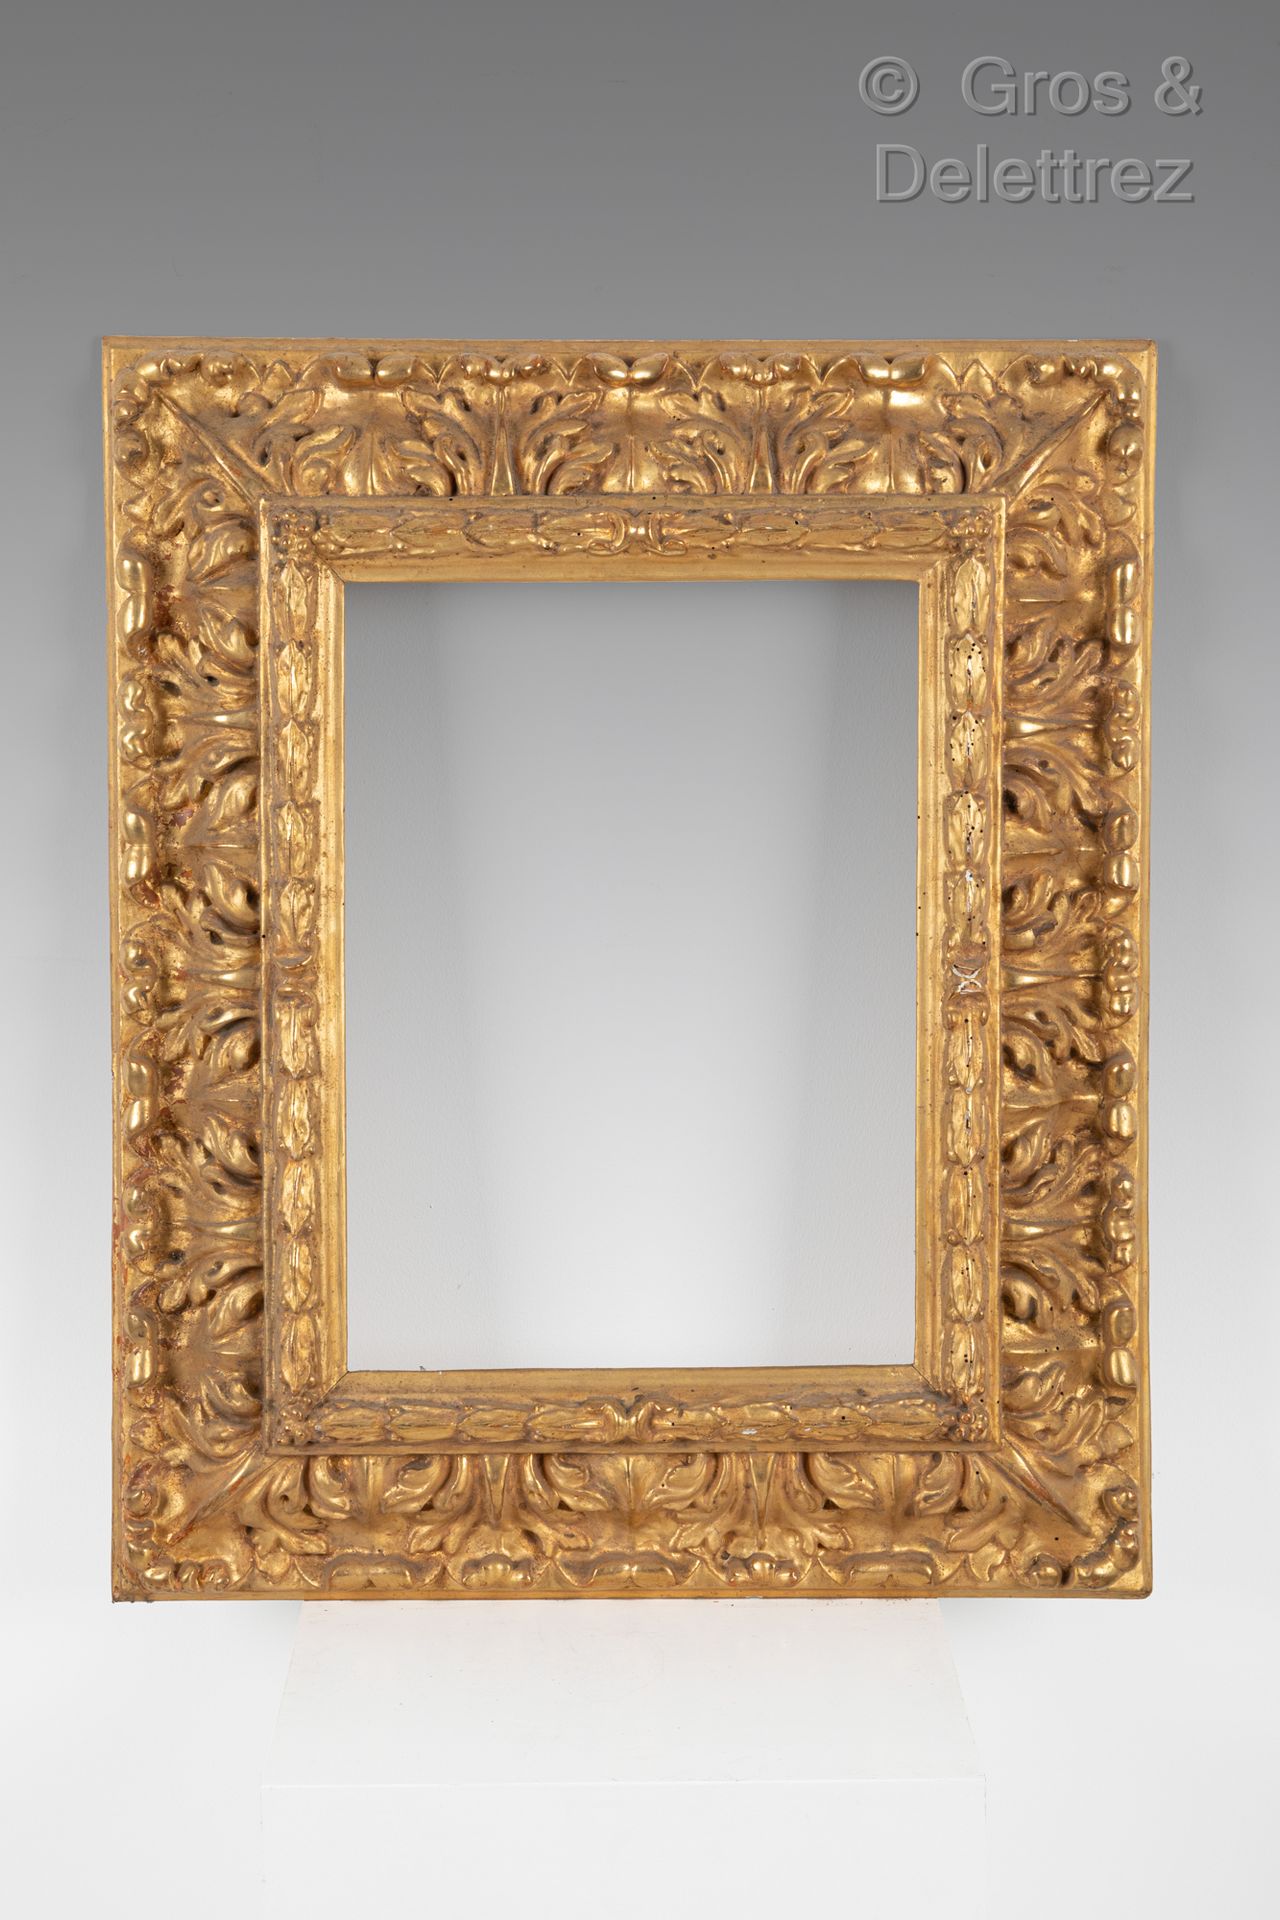 Null A carved and gilded wood frame with acanthus leaves and laurel bundles.

Fl&hellip;